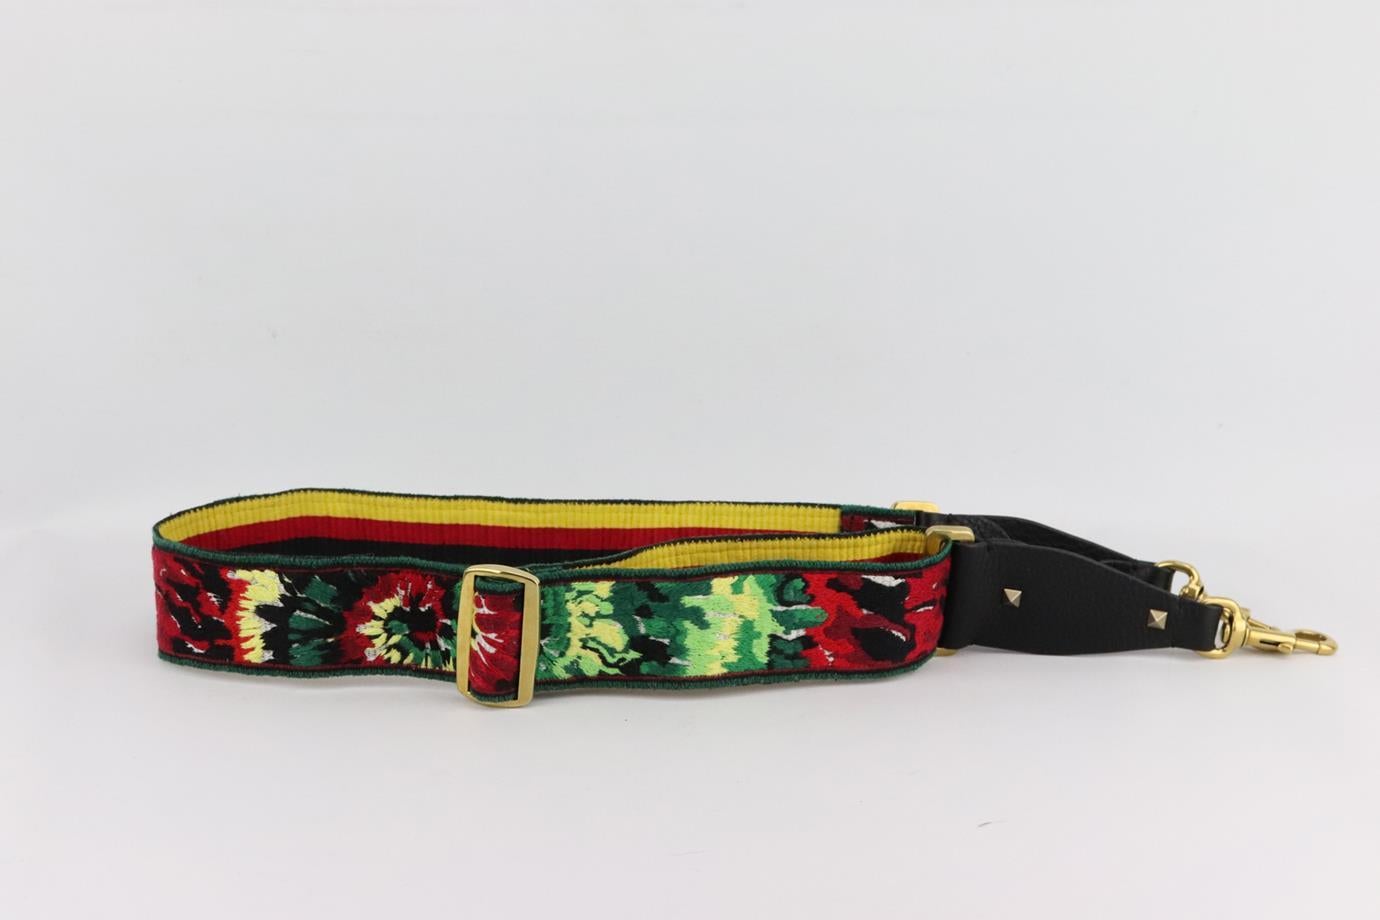 Valentino Garavani customised embroidered canvas and leather bag strap. Red, green, black, white and yellow. Lobster clasp fastening at base. Does not come with box or dustbag. Max. Length: 51 in. Min. Length: 34 in. Width: 2 in. Very good condition